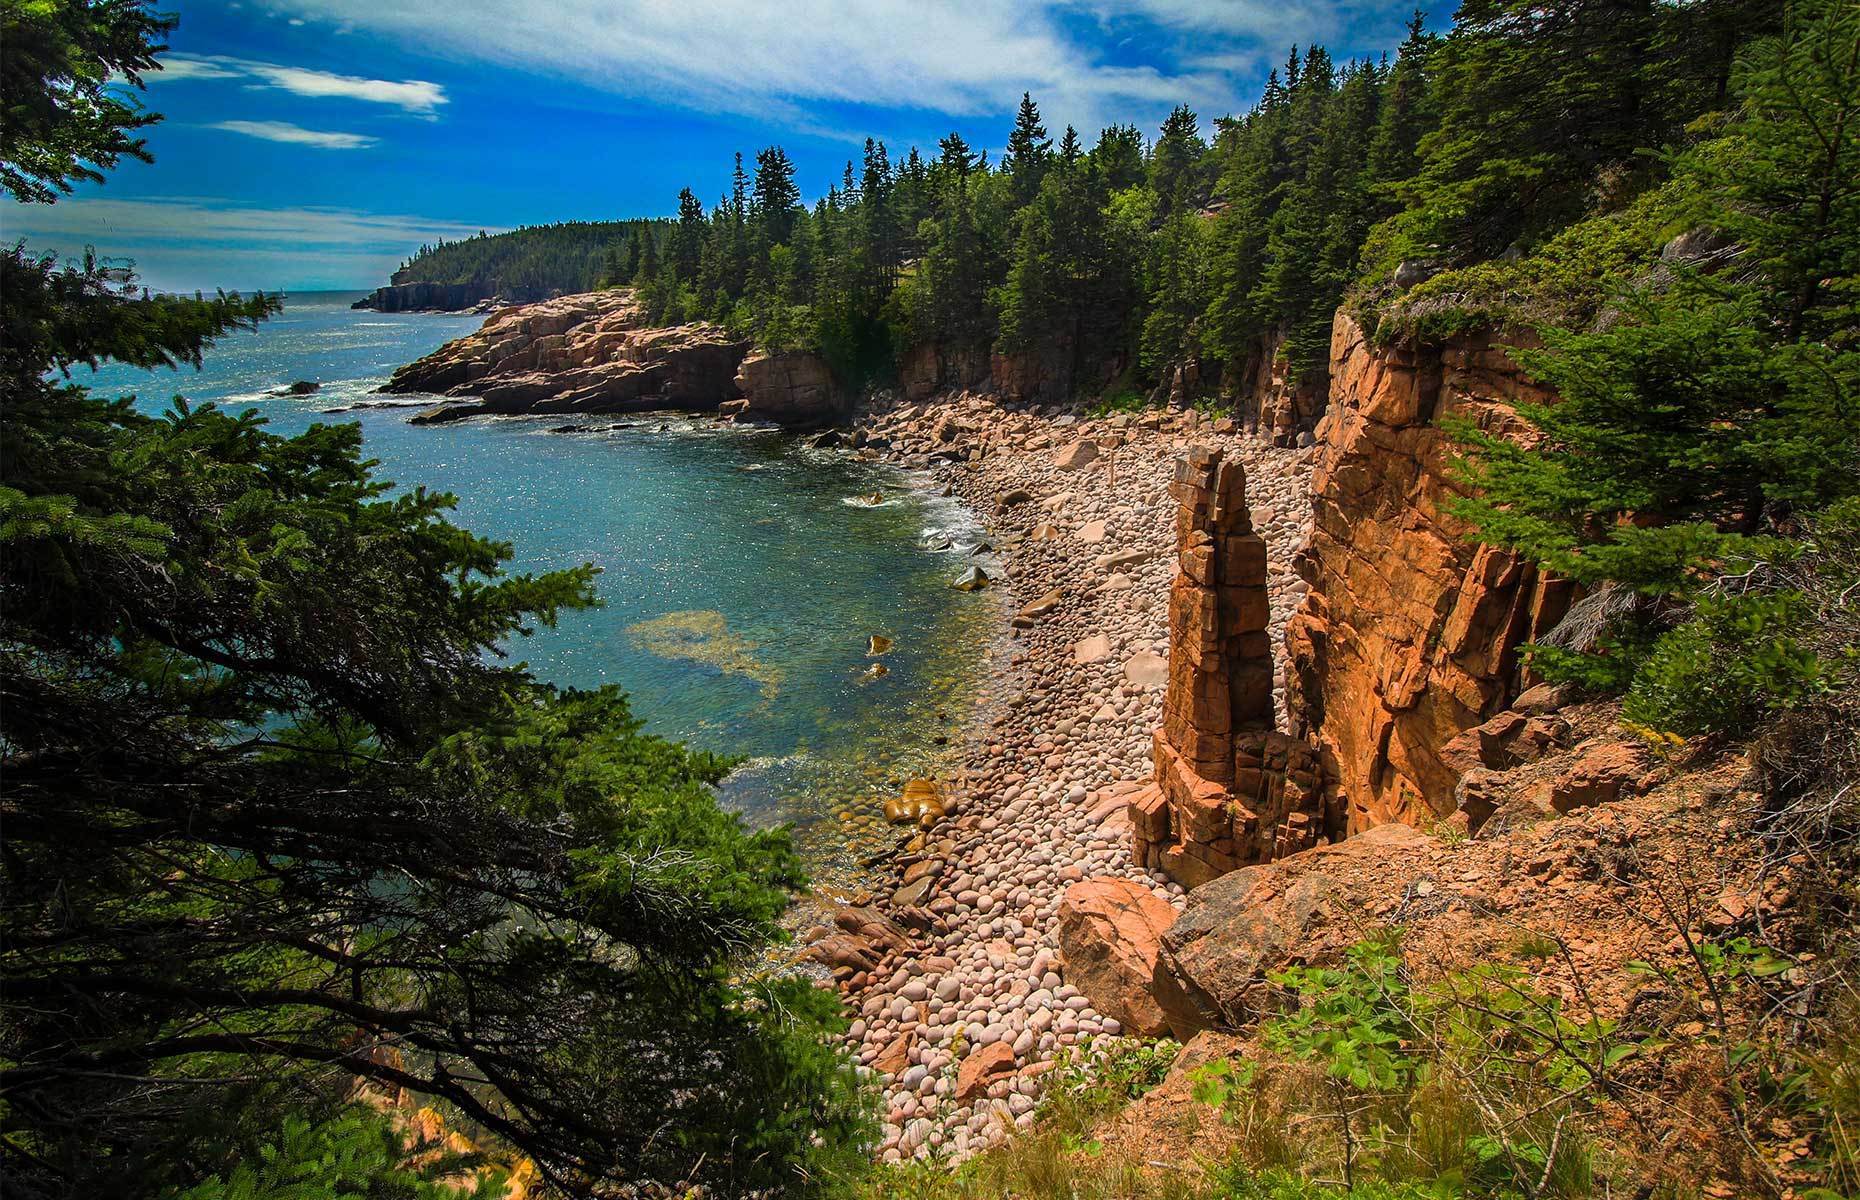 <p class="p1"><span>The red rocks found on Mount Desert Island in Acadia National Park are a sight to behold. Nature lovers who also enjoy a bit of a thrill will get goosebumps knowing that this park is only <a href="https://visitmaine.com/things-to-do/parks-natural-attractions/acadia-national-park" rel="noreferrer noopener"><span>80 km from Bangor</span></a>, home to <a href="https://bangordailynews.com/2018/04/11/opinion/contributors/stephen-king-explains-why-he-chose-to-live-in-bangor/" rel="noreferrer noopener"><span>author Stephen King</span></a>.</span></p>